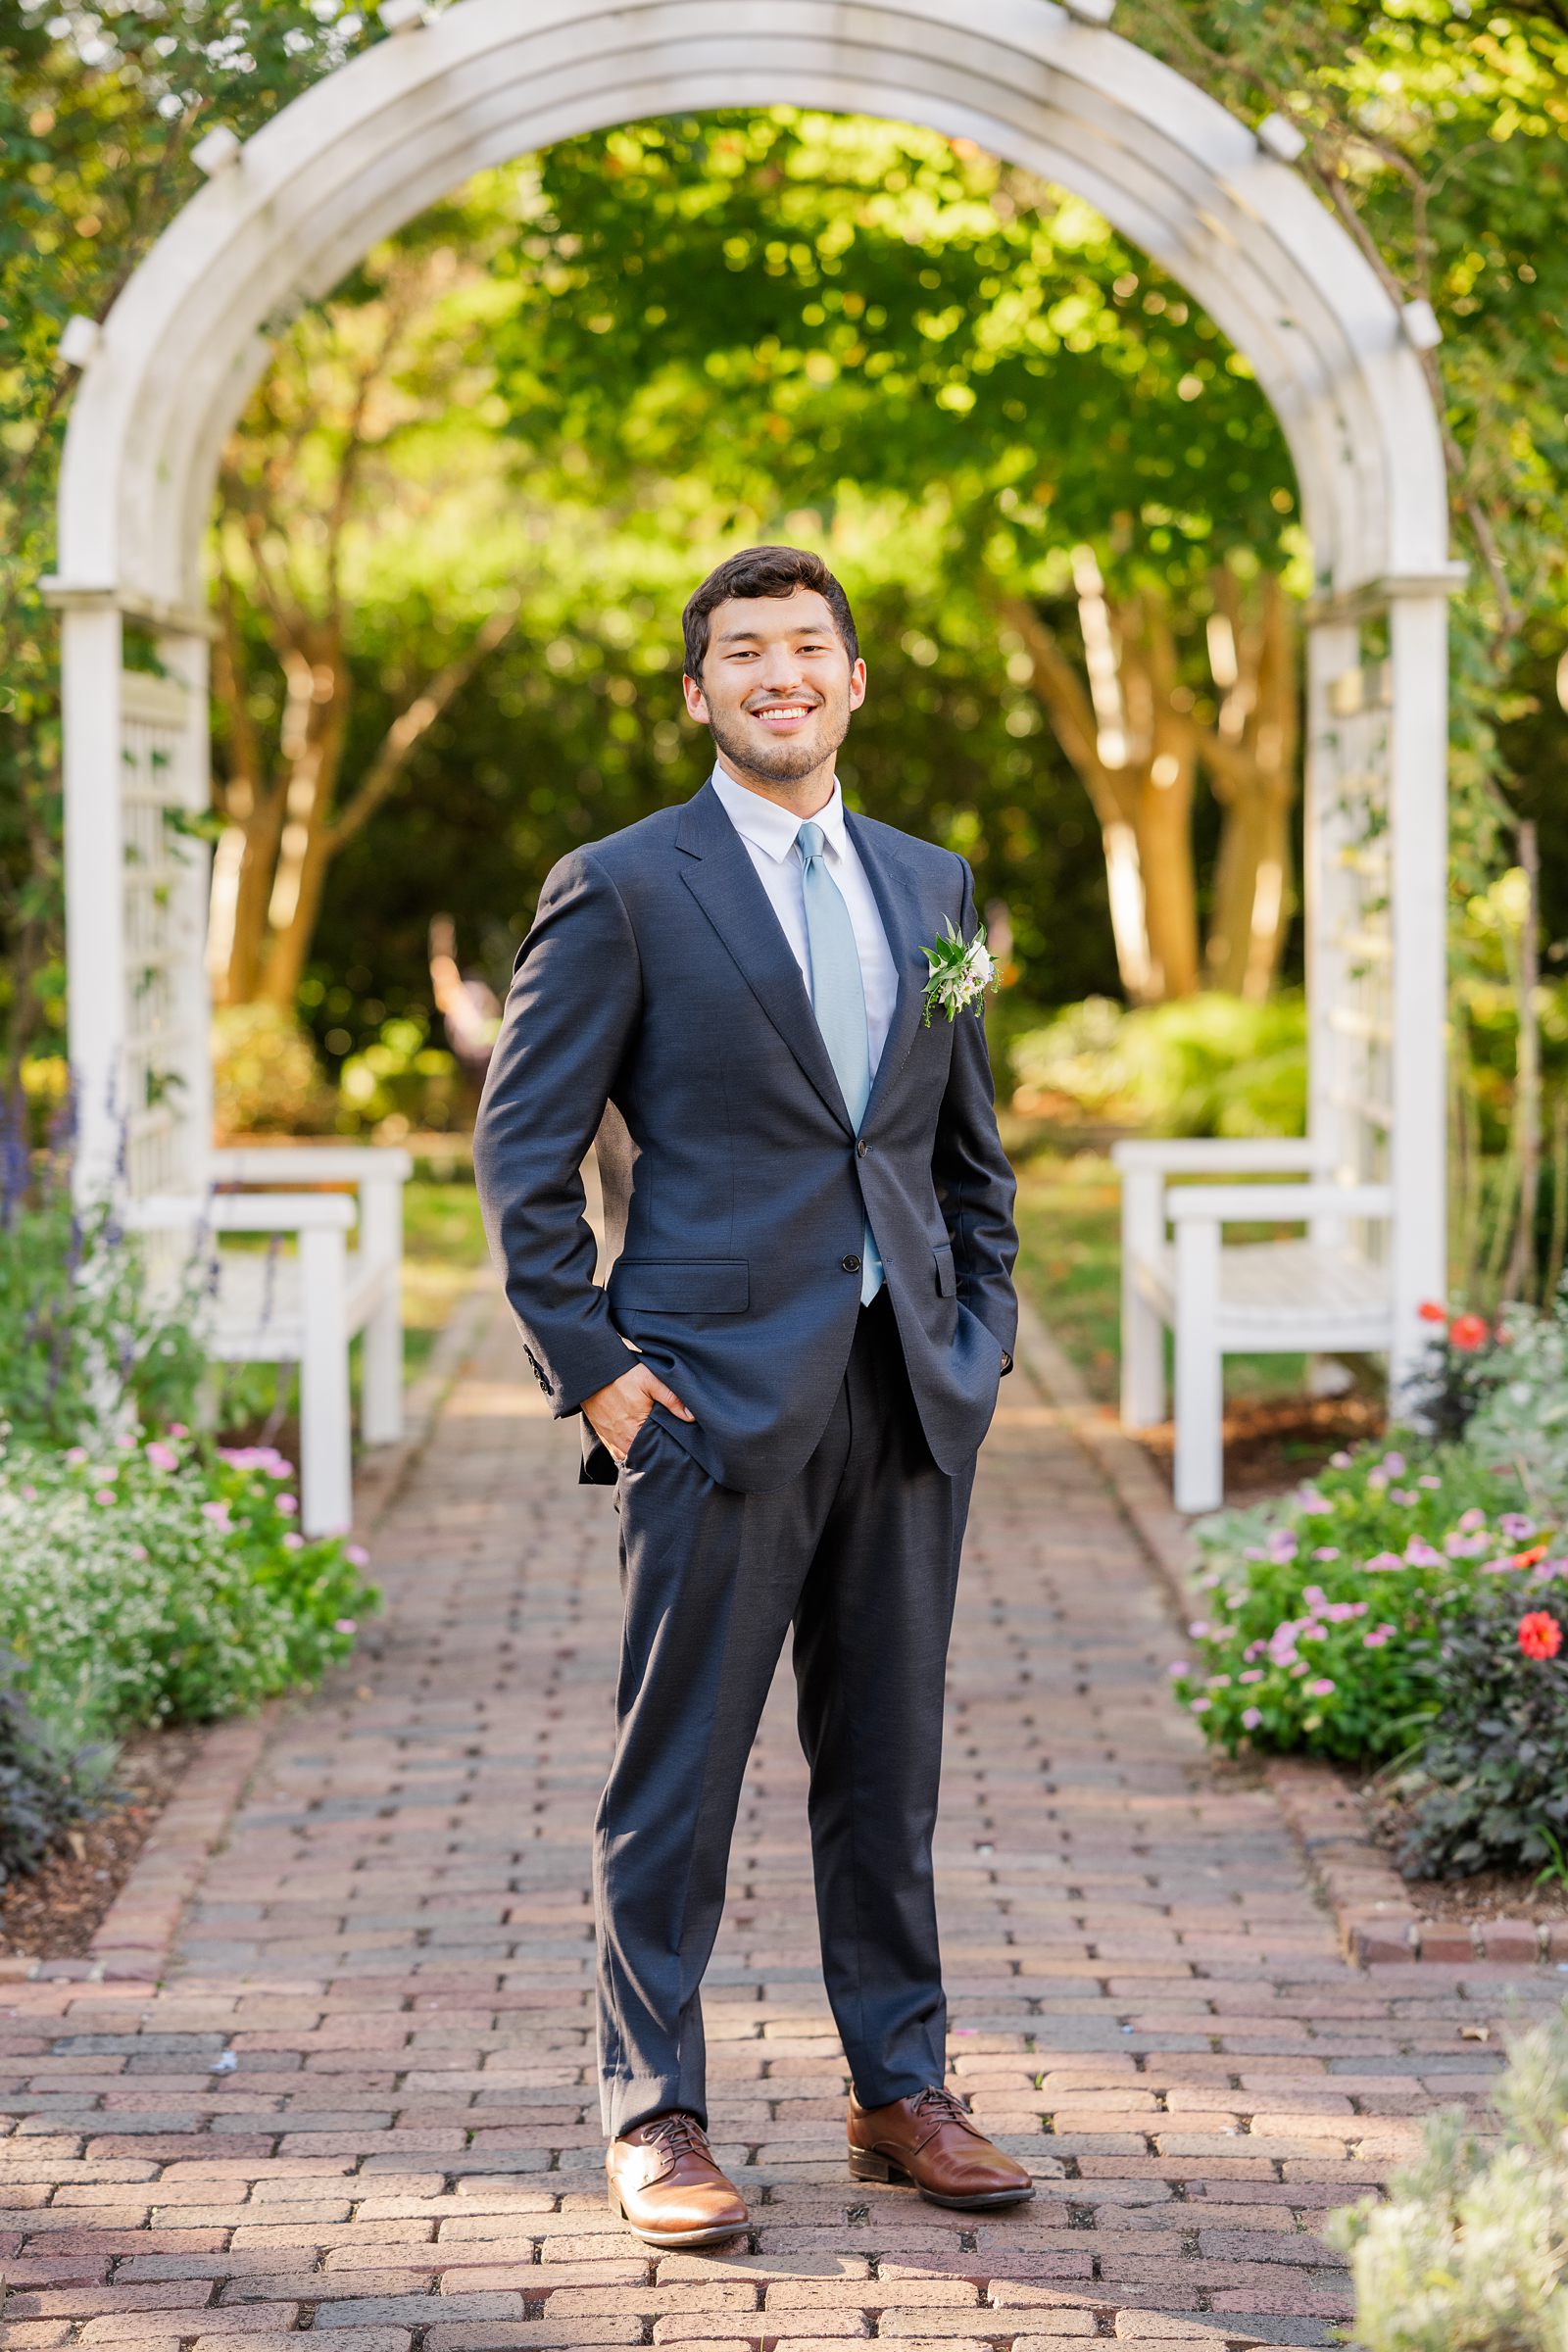 Groom Portraits in the Garden at Fall Lewis Ginter Wedding 